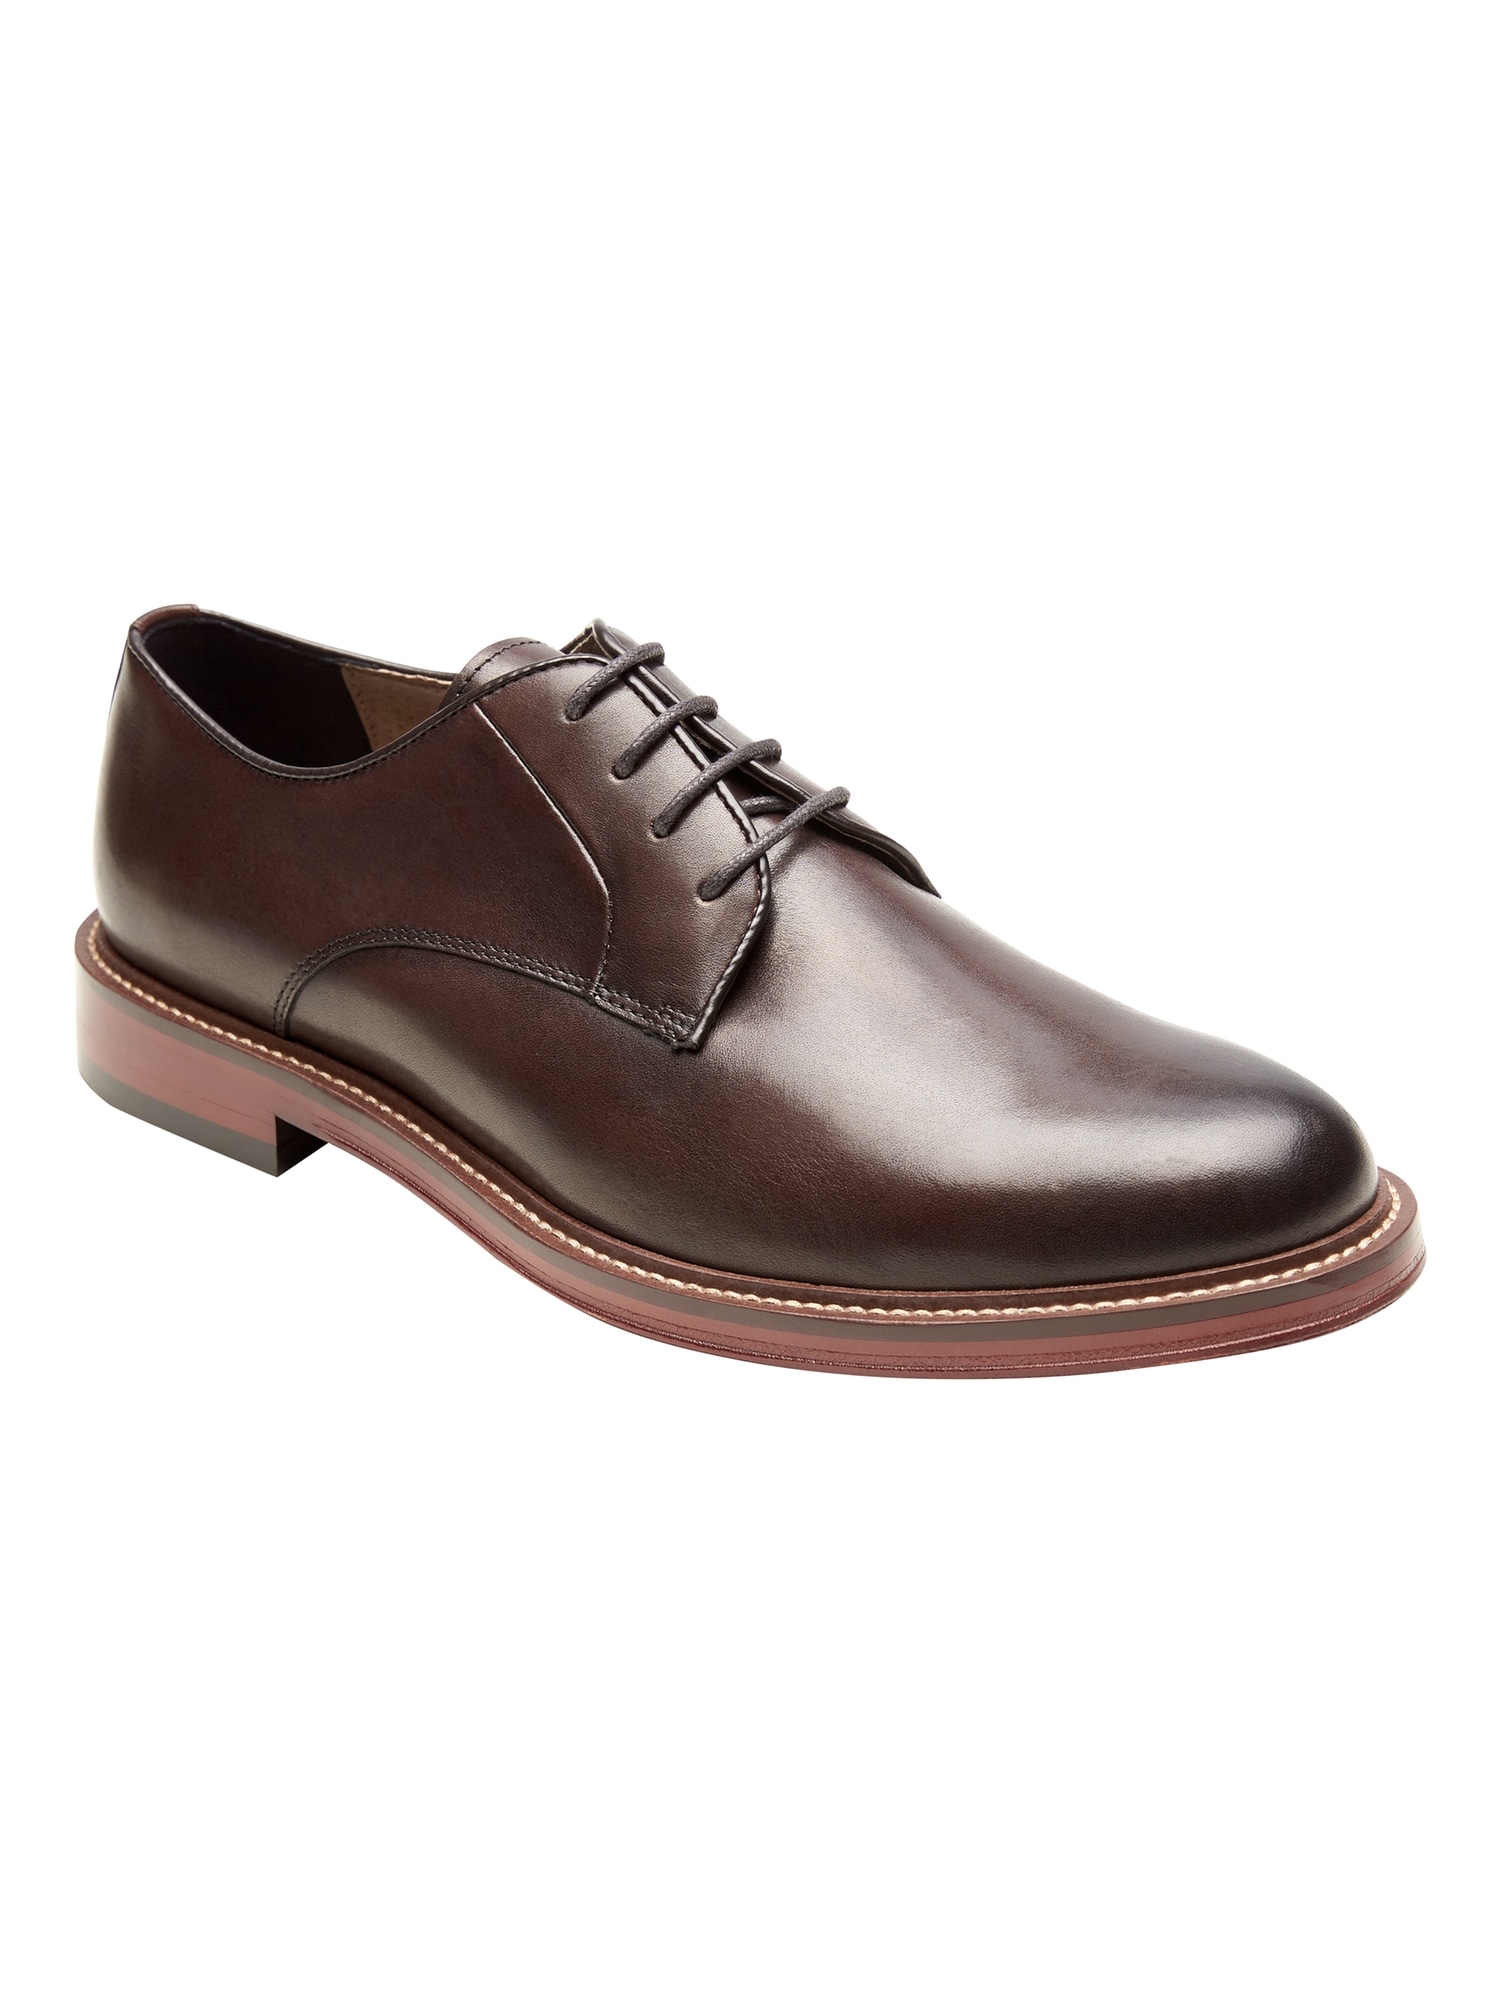 durable oxford shoes